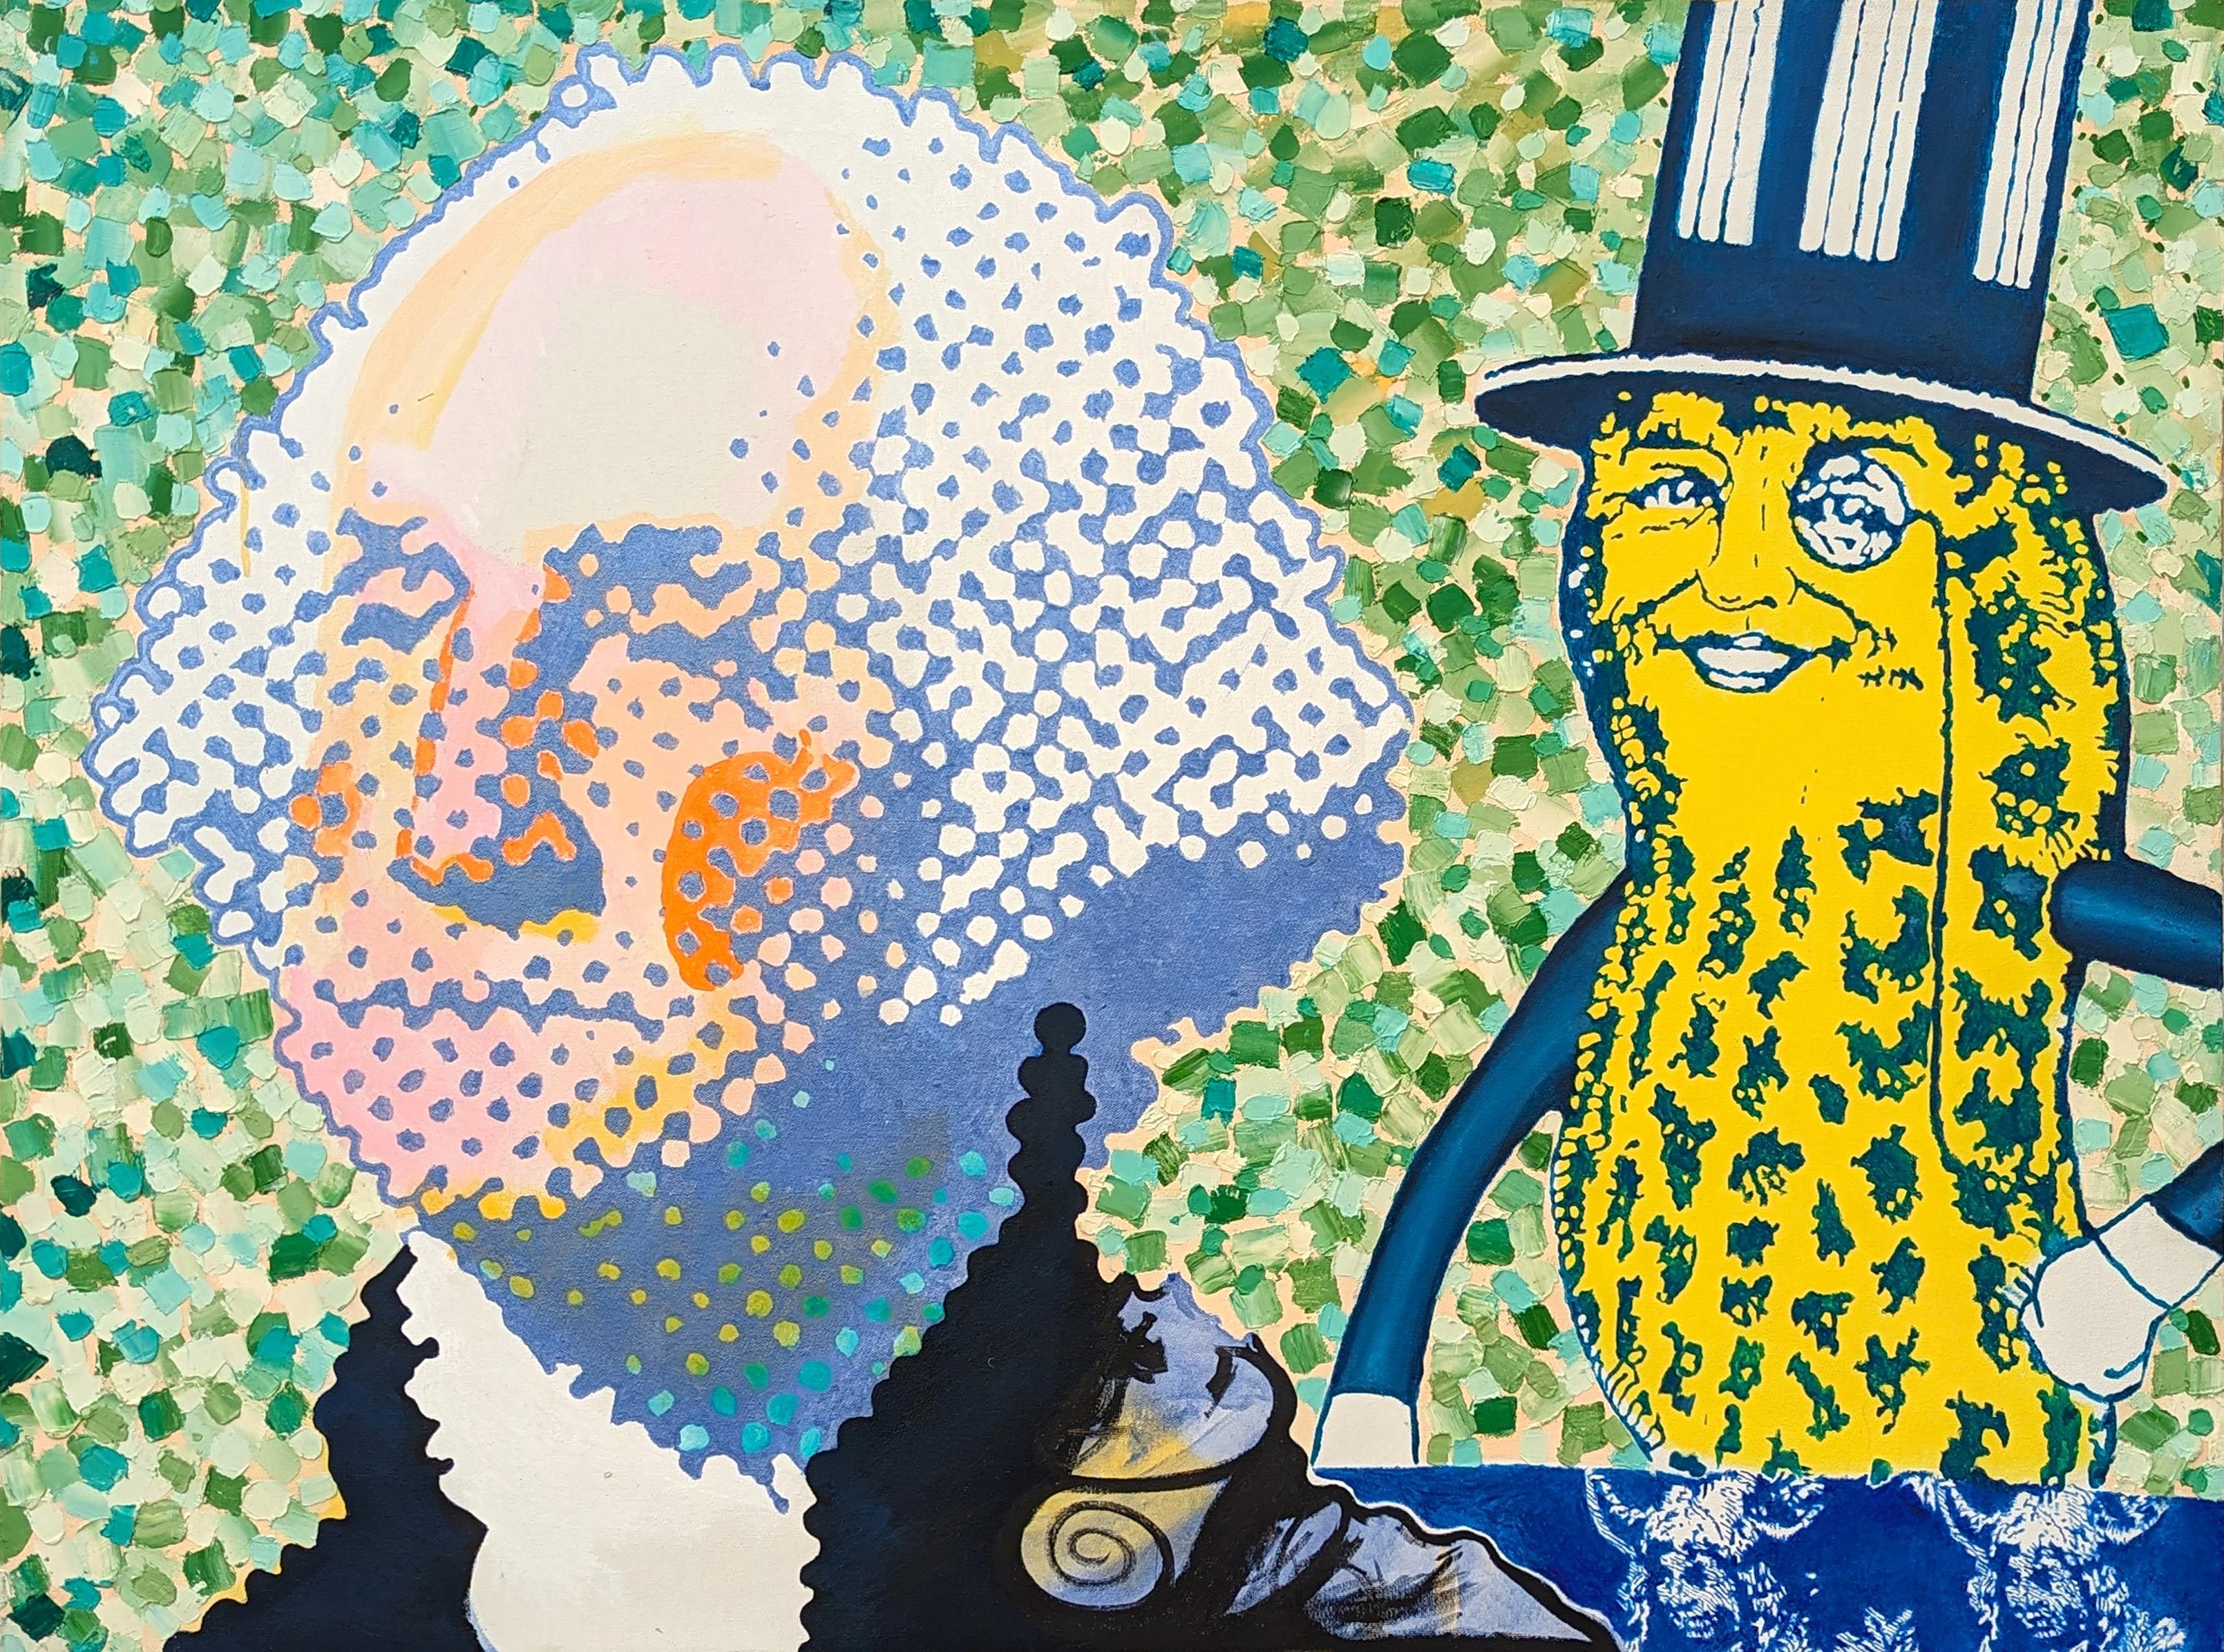 Clark V. Fox Portrait Painting - "Mr. Peanut , George, and Double Native" Contemporary Pop Culture Painting